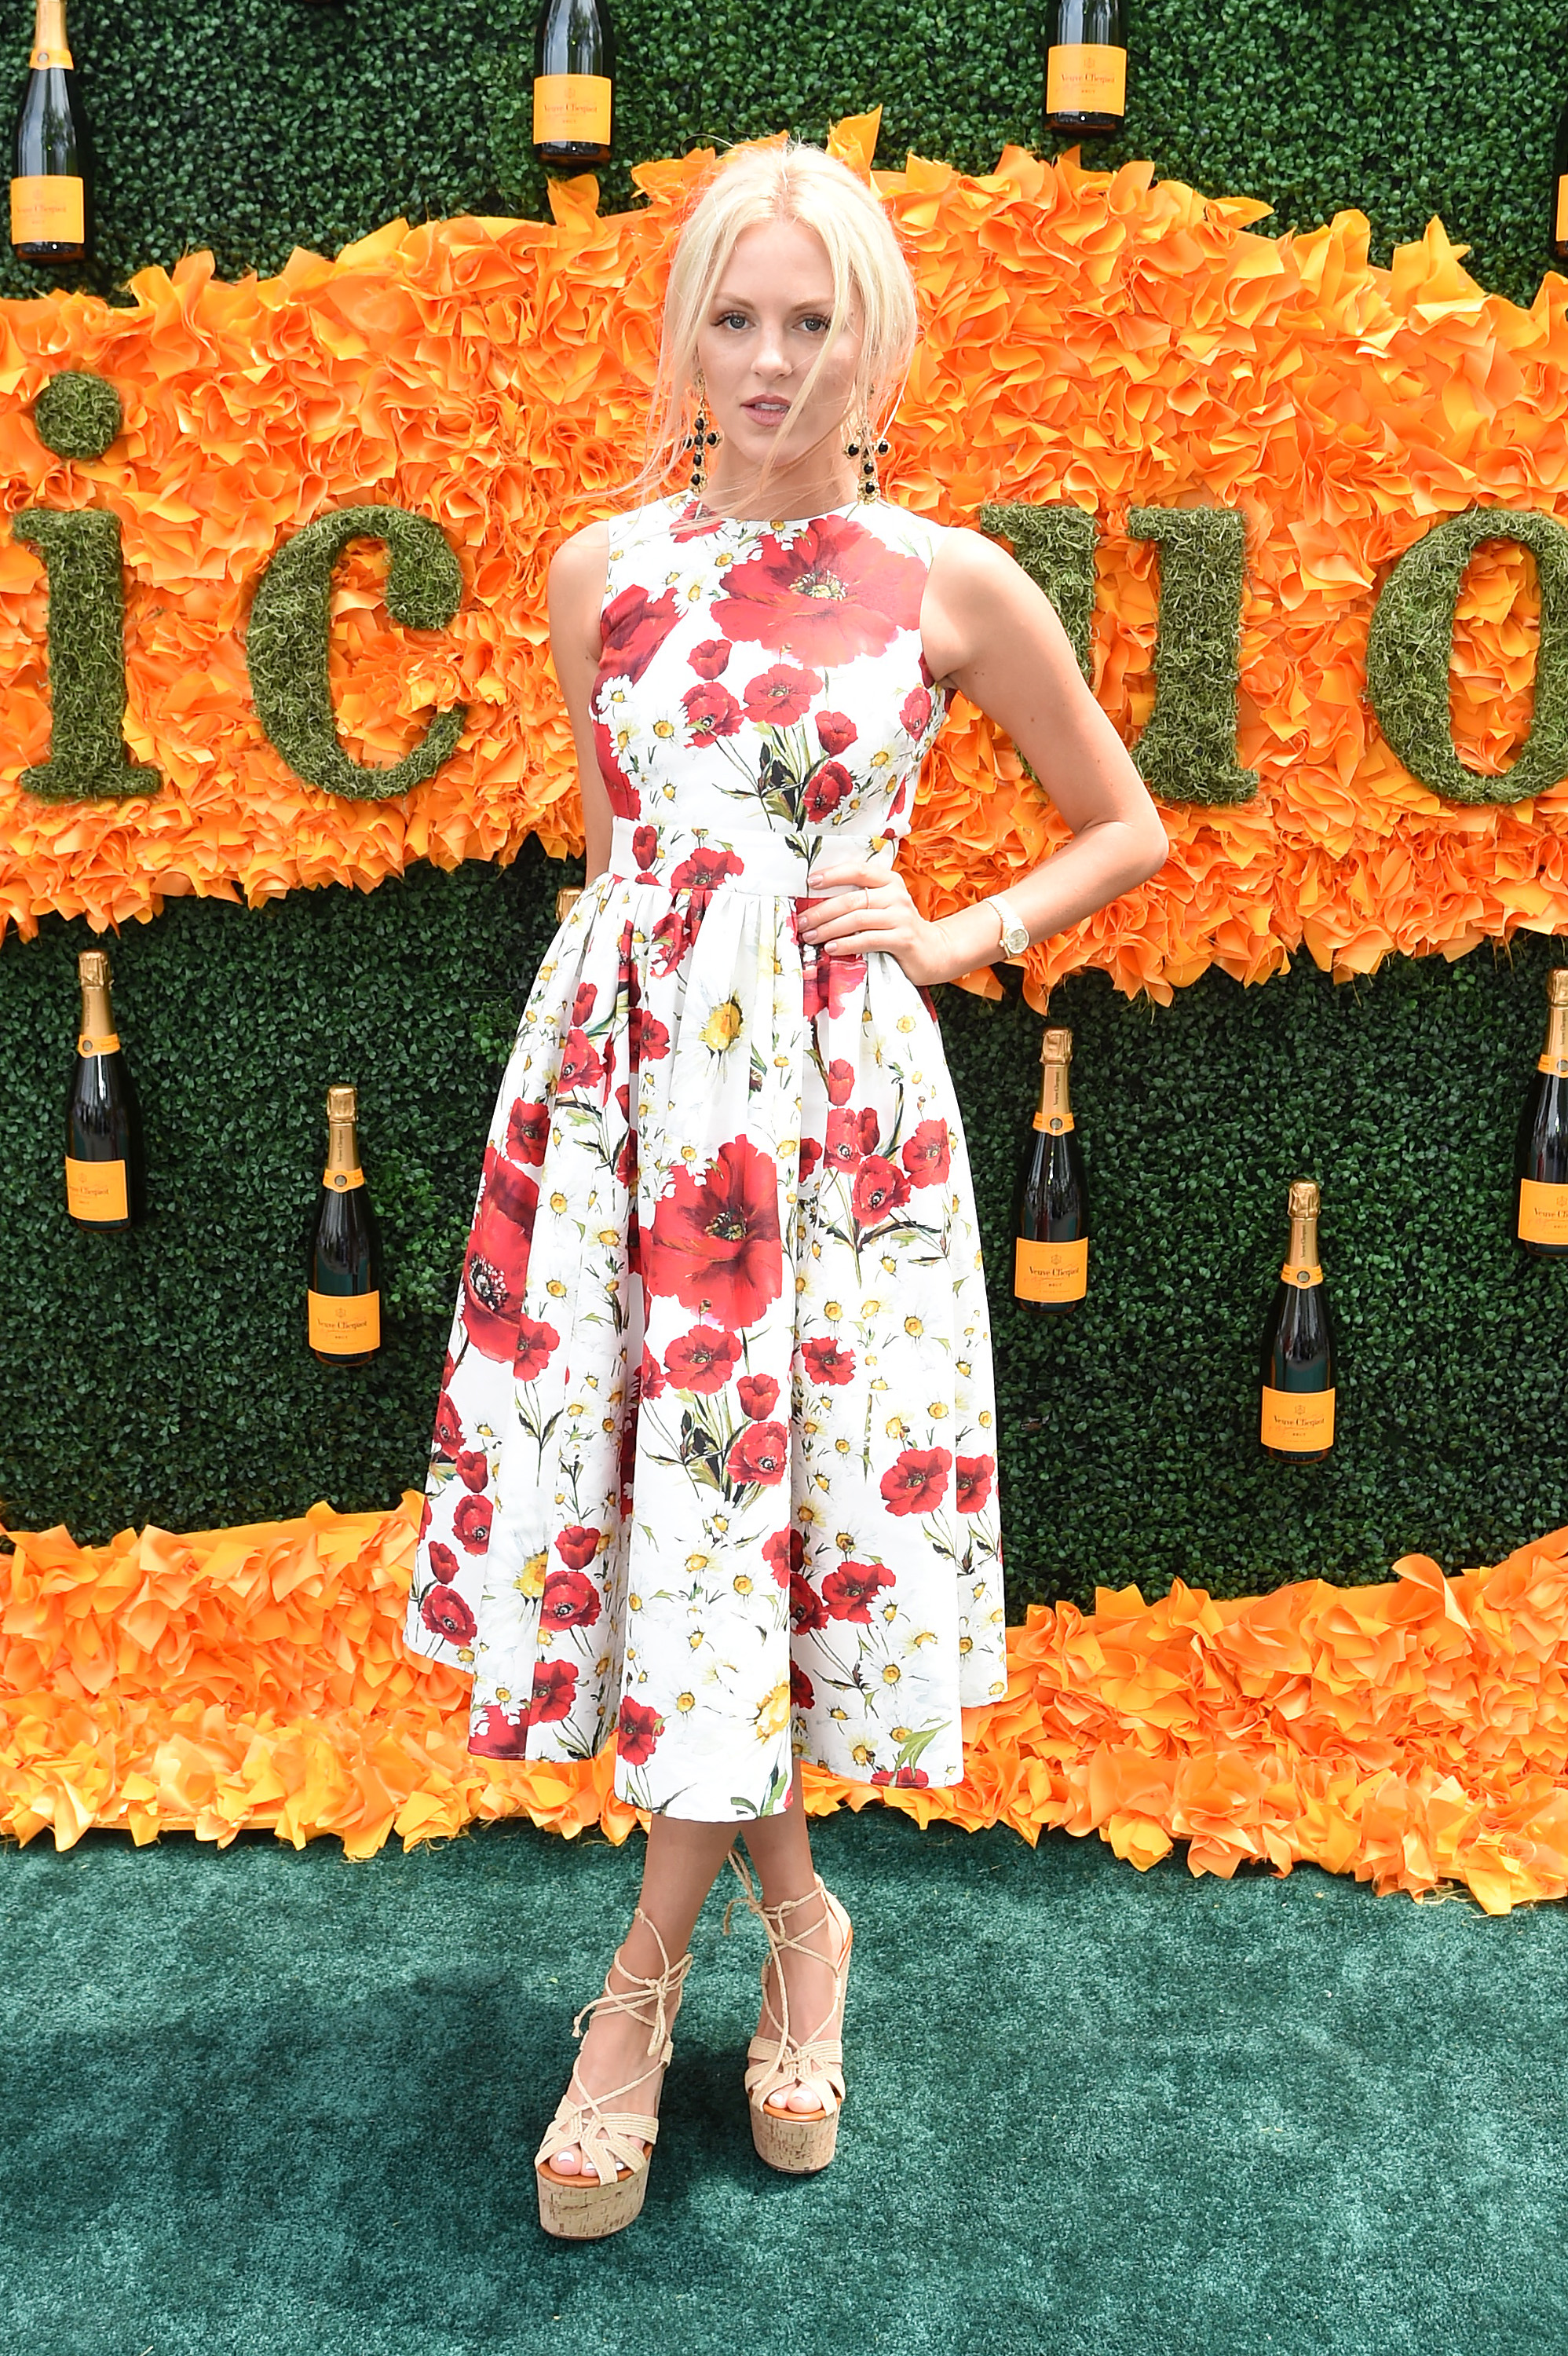 JERSEY CITY, NJ - JUNE 04:  Shea Marie attends the Ninth Annual Veuve Clicquot Polo Classic at Liberty State Park on June 4, 2016 in Jersey City, New Jersey.  (Photo by Jamie McCarthy/Getty Images for Veuve Clicquot)